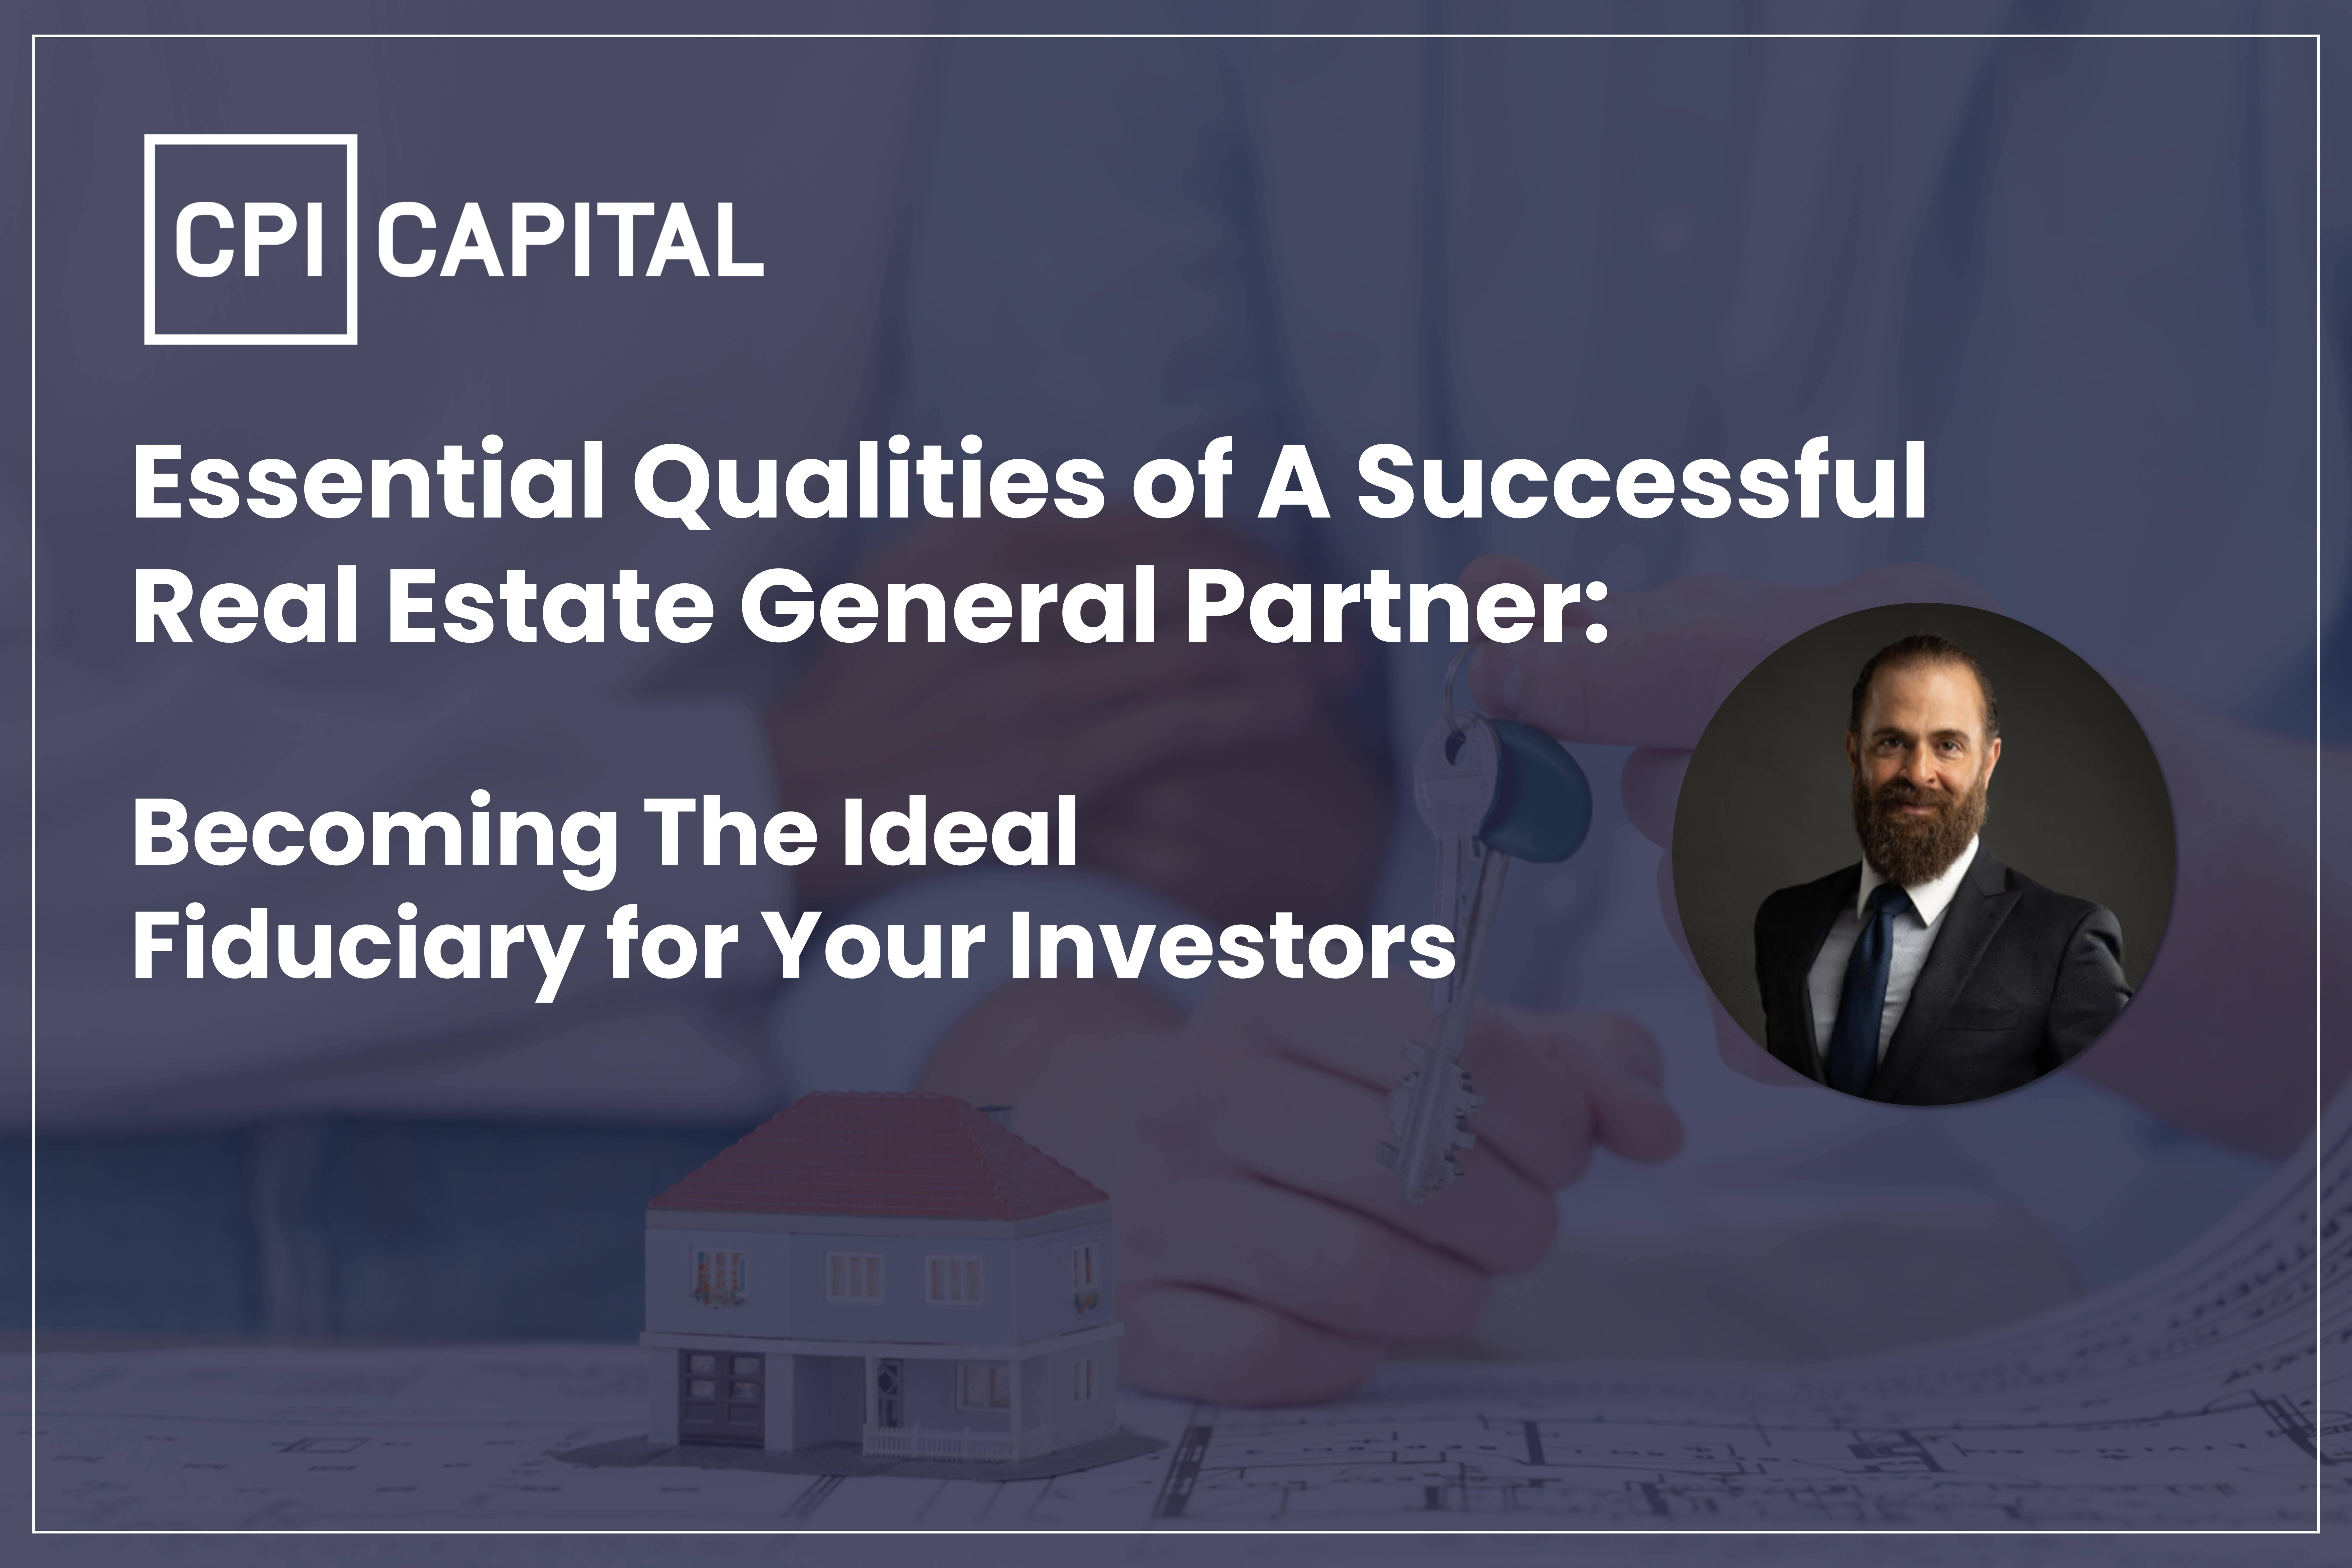 CPI capital_Essential Qualities Of A Successful Real Estate General Partner Becoming The Ideal Fiduciary for Your Investors